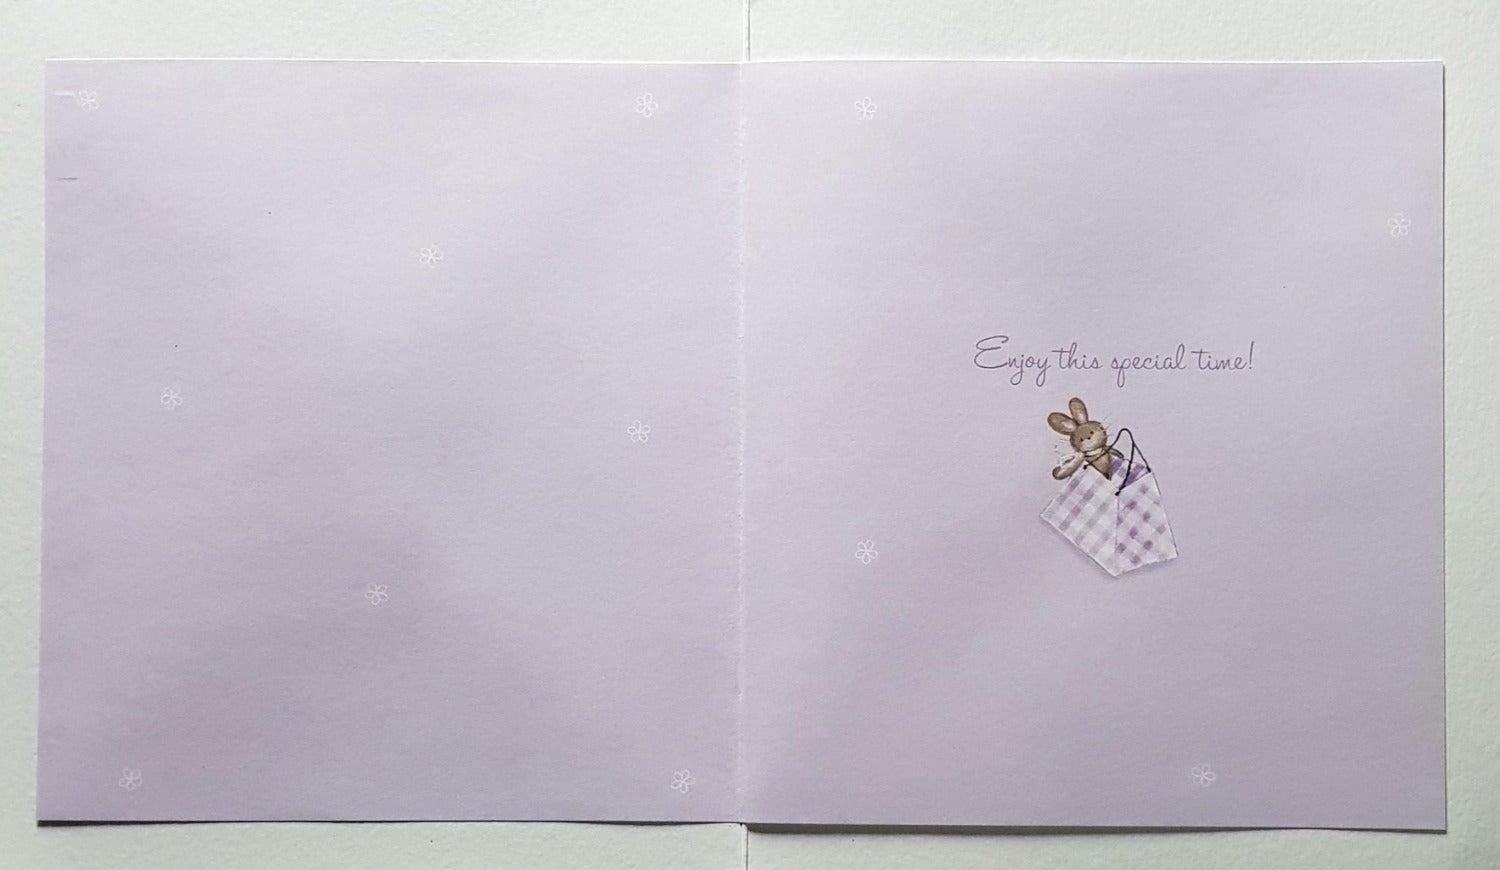 New Baby Card - Mum To Be / 'Dream, Plan, Shop...' & A Lady With Shopping Bags And Gifts